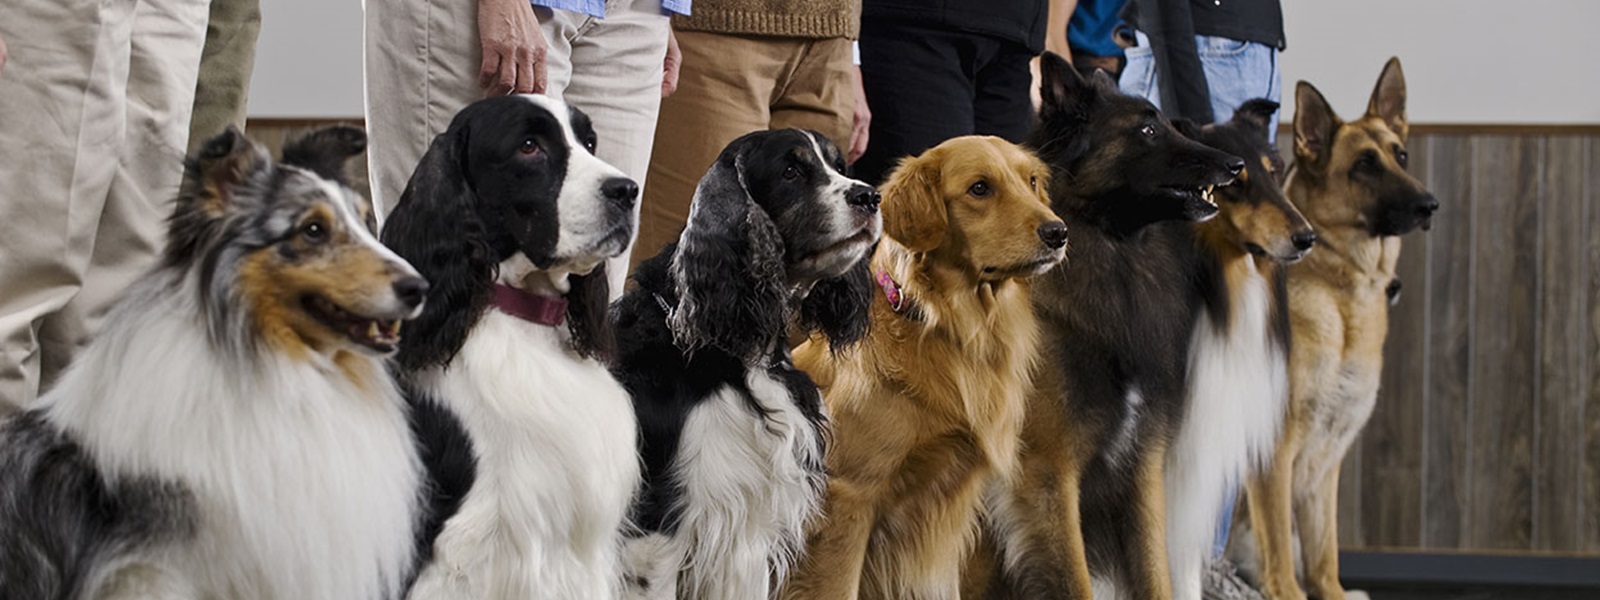 Line of purebred dogs in obedience class with owners